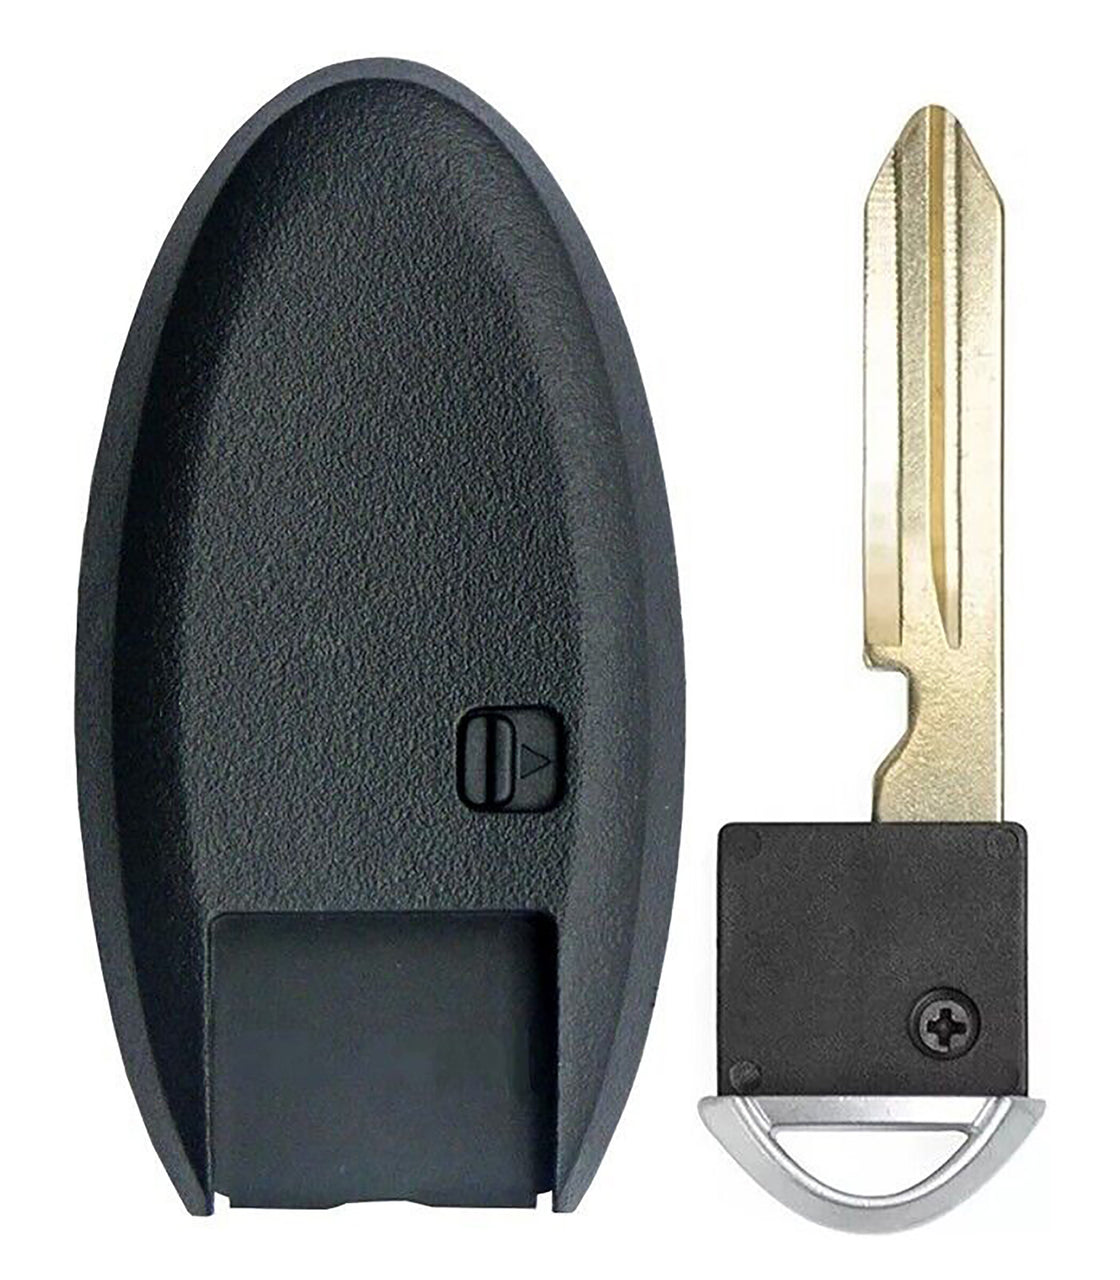 1x New Replacement Proximity Key Fob Compatible with & Fit For Nissan Vehicle. Read Description - MPN KR5TXN1-02